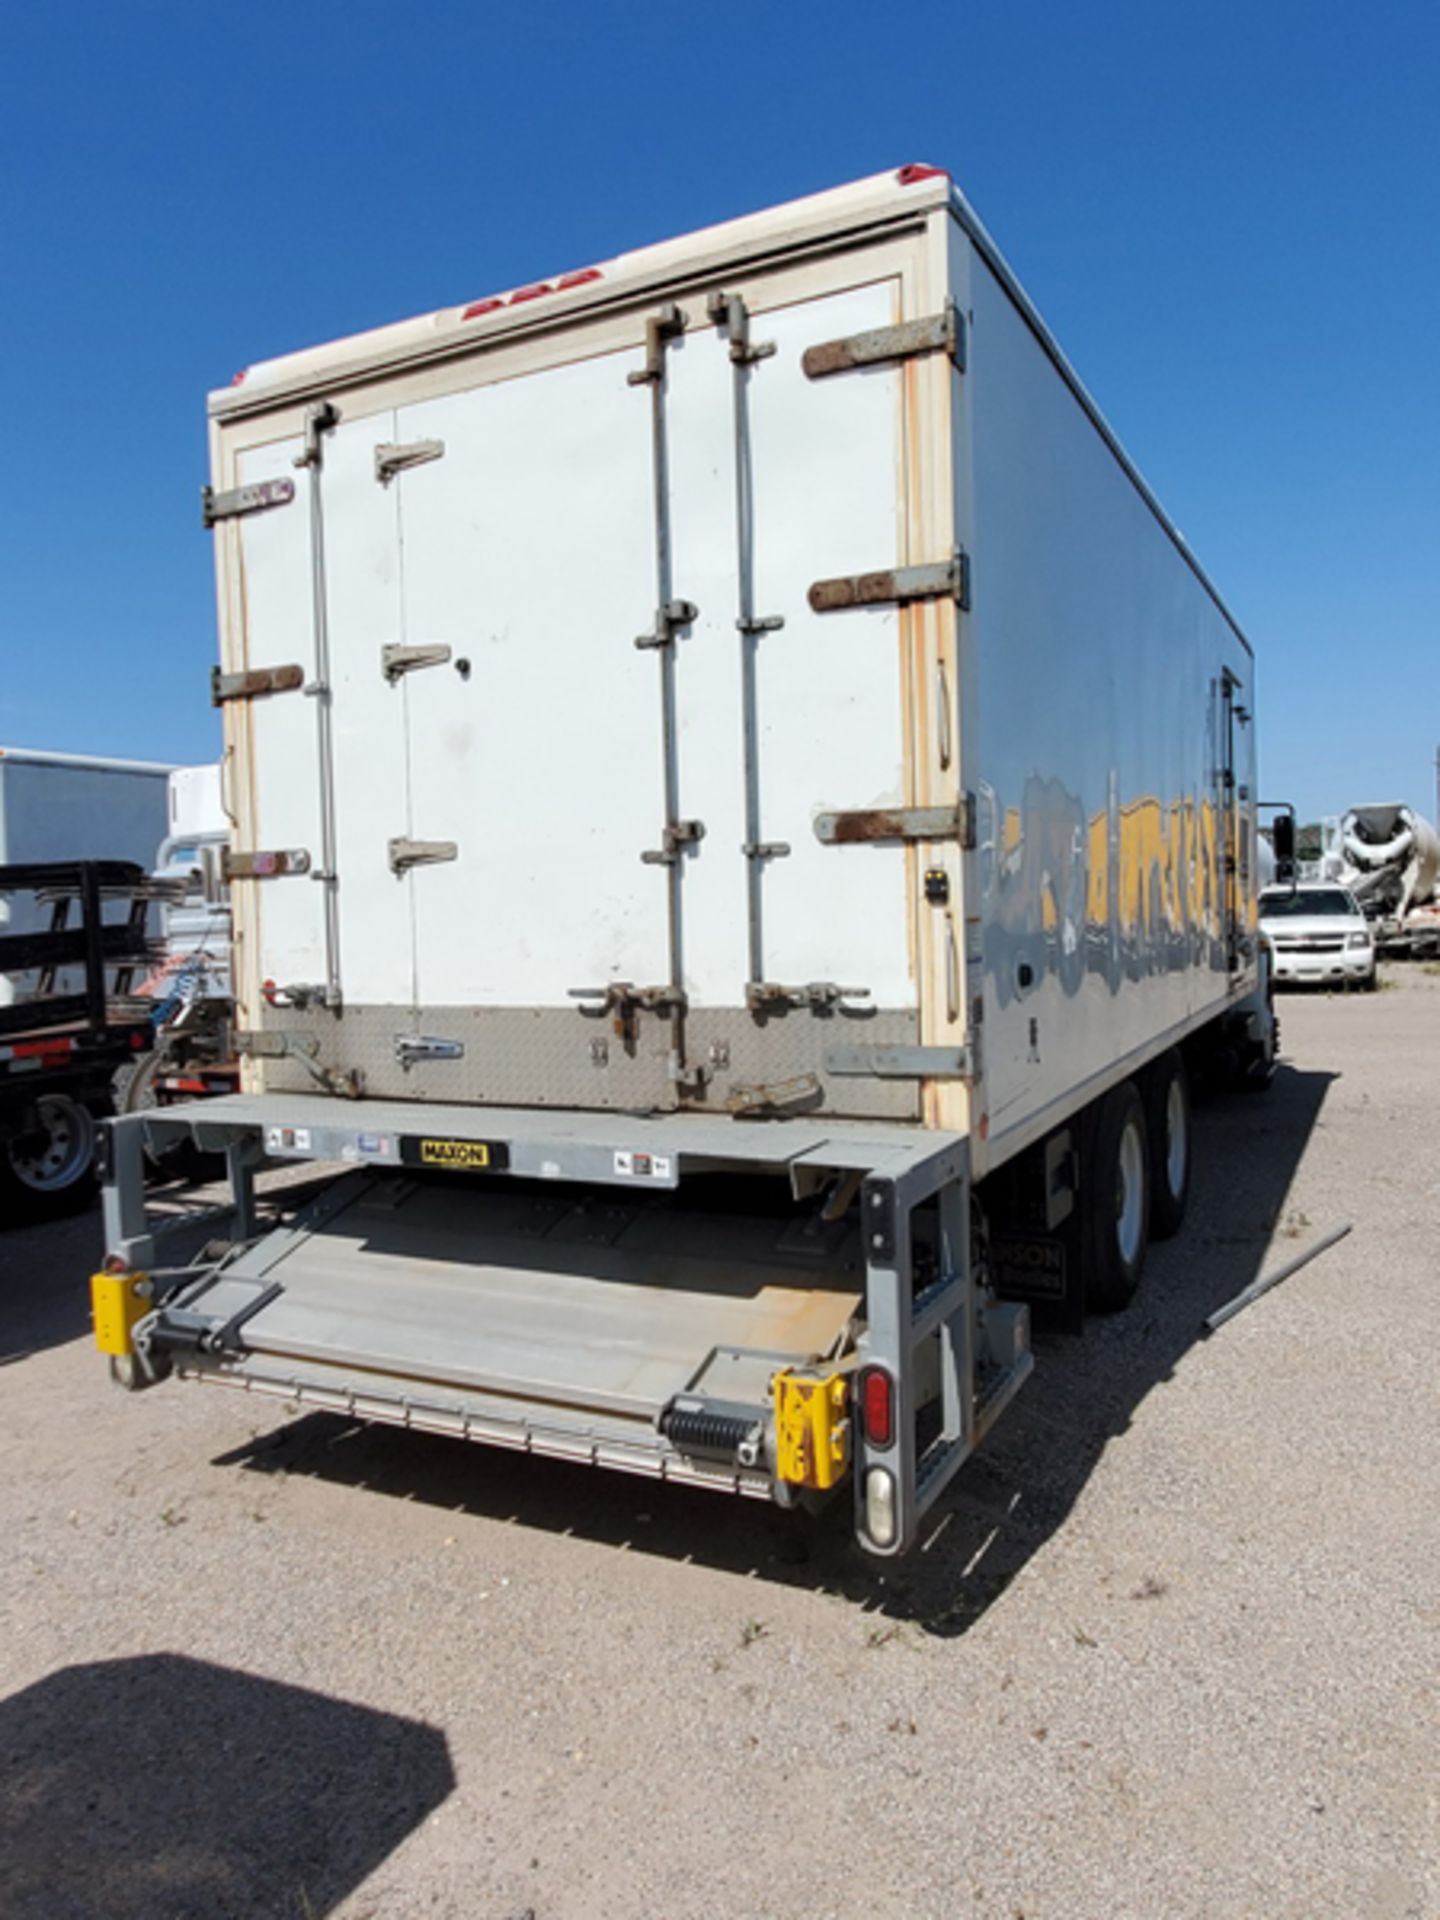 2018 INTERNATIONAL 4400 SBA 6X4 REFRIGERATED BOX TRUCK VIN#: 1HTMSTAR3JH529622, Approx Miles: 60584, - Image 3 of 8